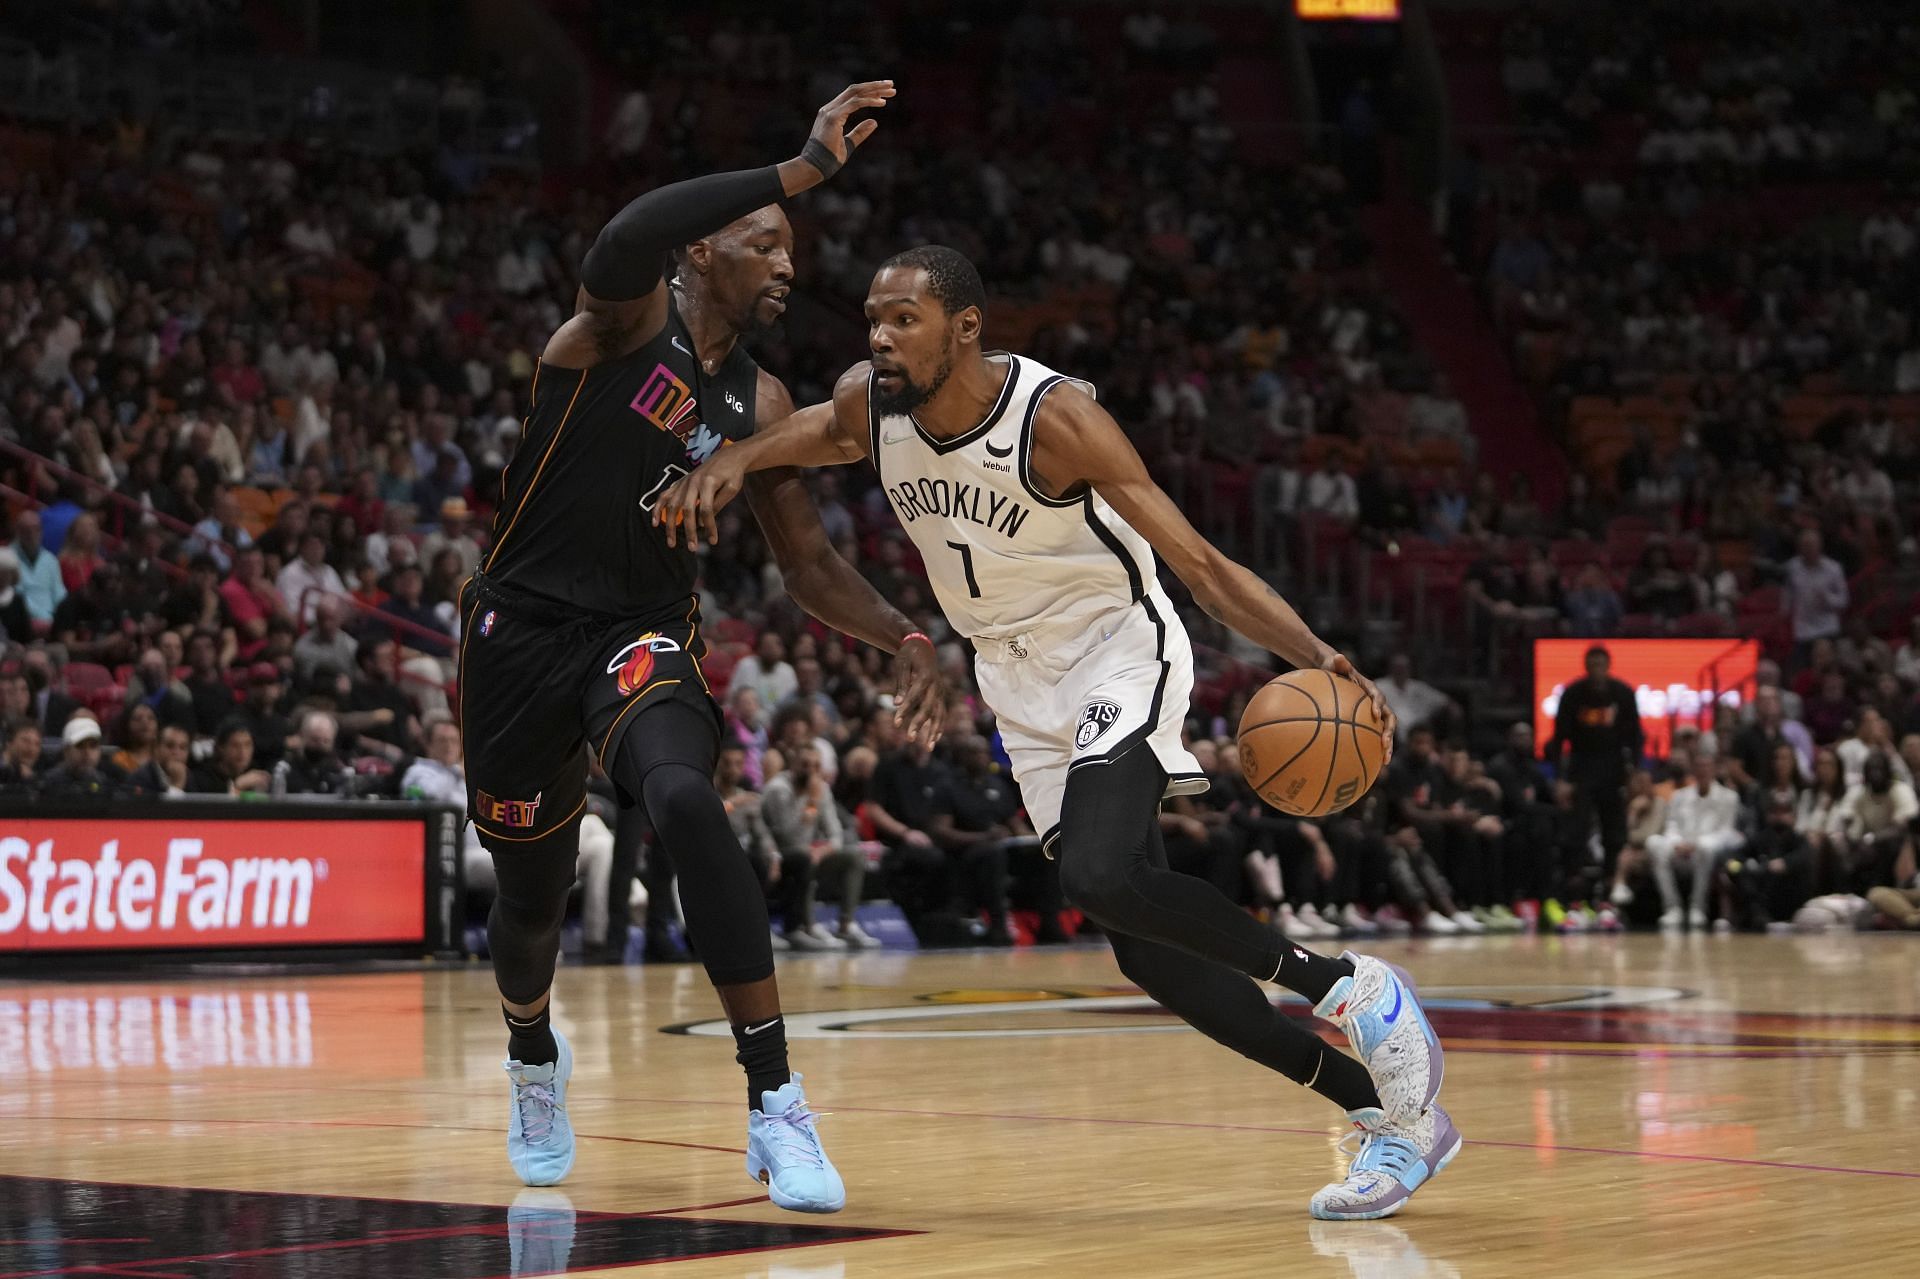 Bam Adebayo of the Miami Heat defends Kevin Durant of the Brooklyn Nets